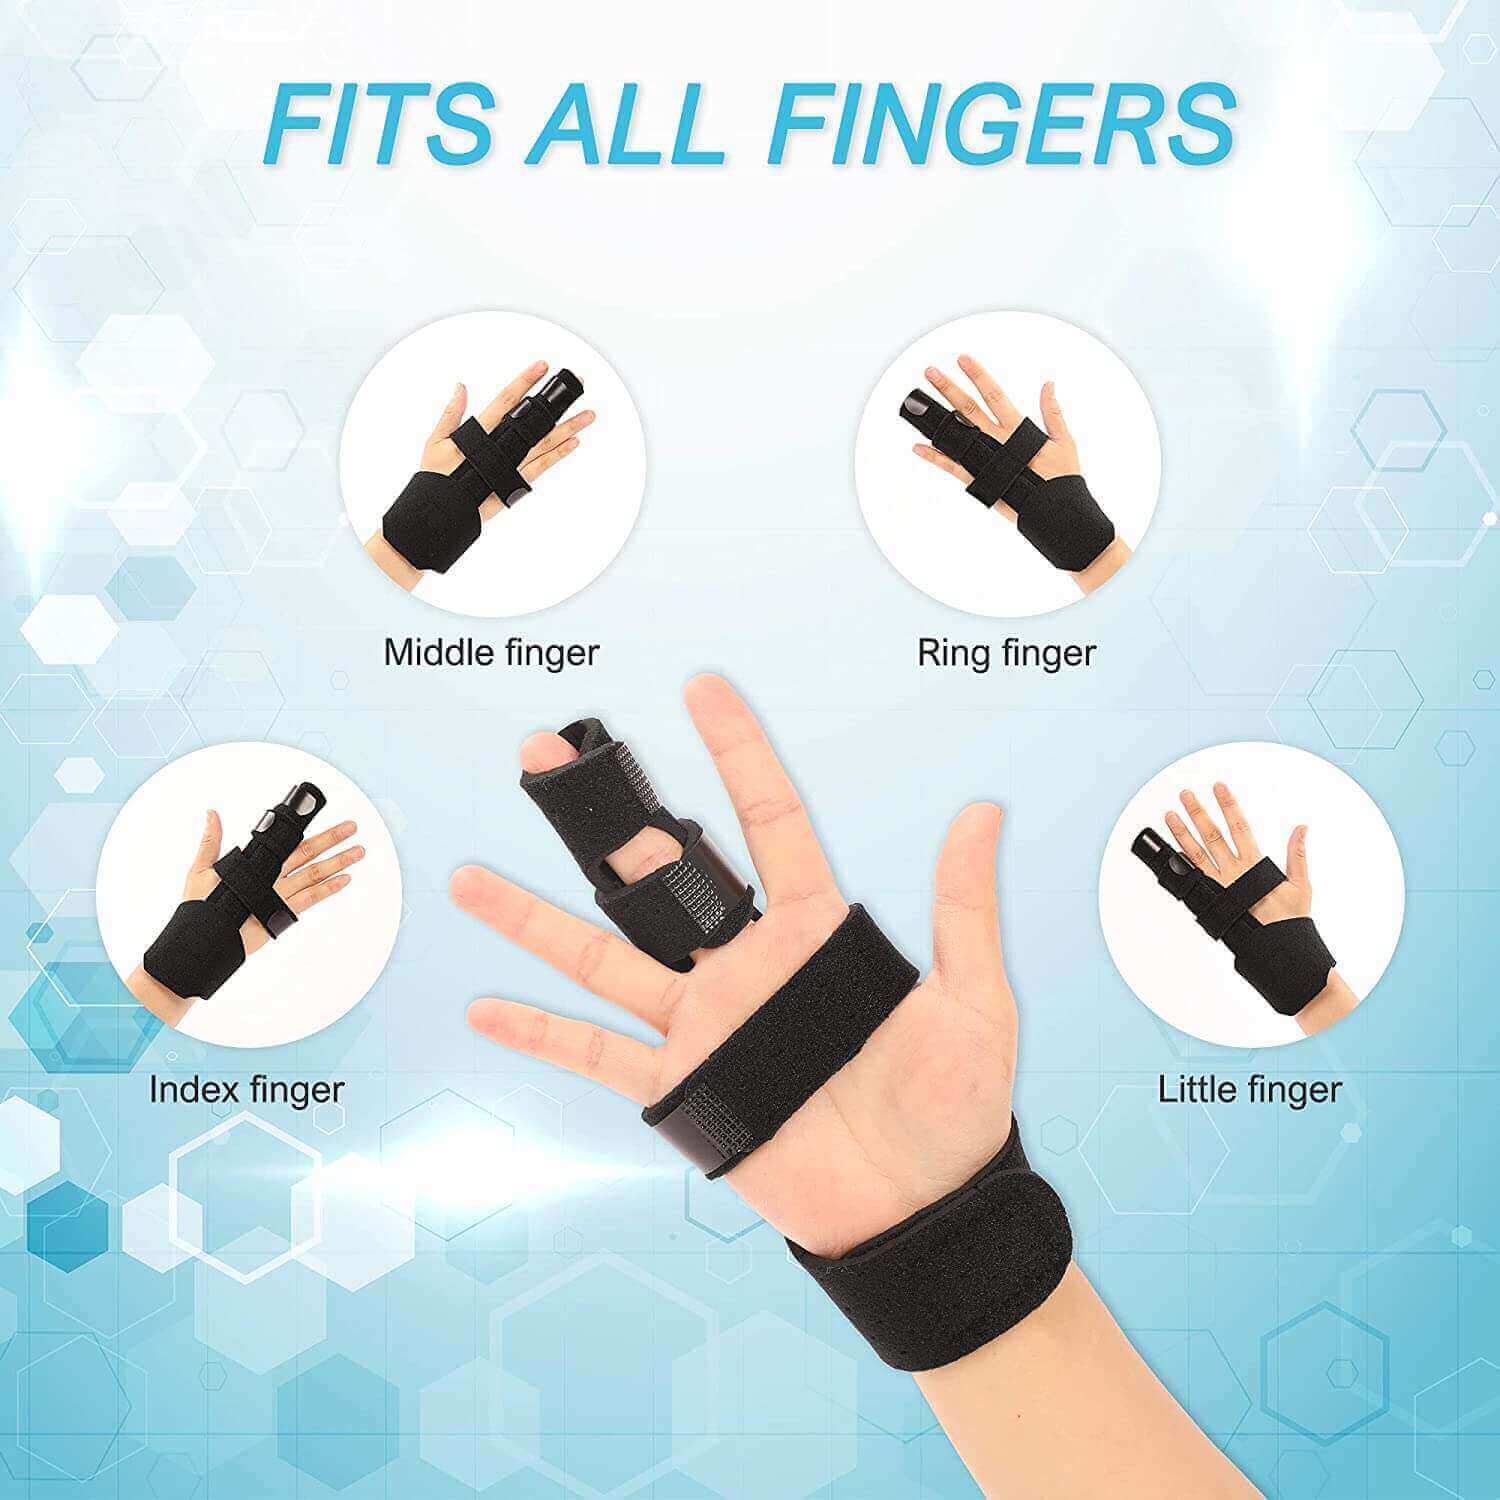 Buy WITSOUL Finger Splint Adjustable Protective Sleeve Relieve Pain - Any  Finger, Any Hand – Universal Size, Unisex (1) Online at Low Prices in India  - Amazon.in